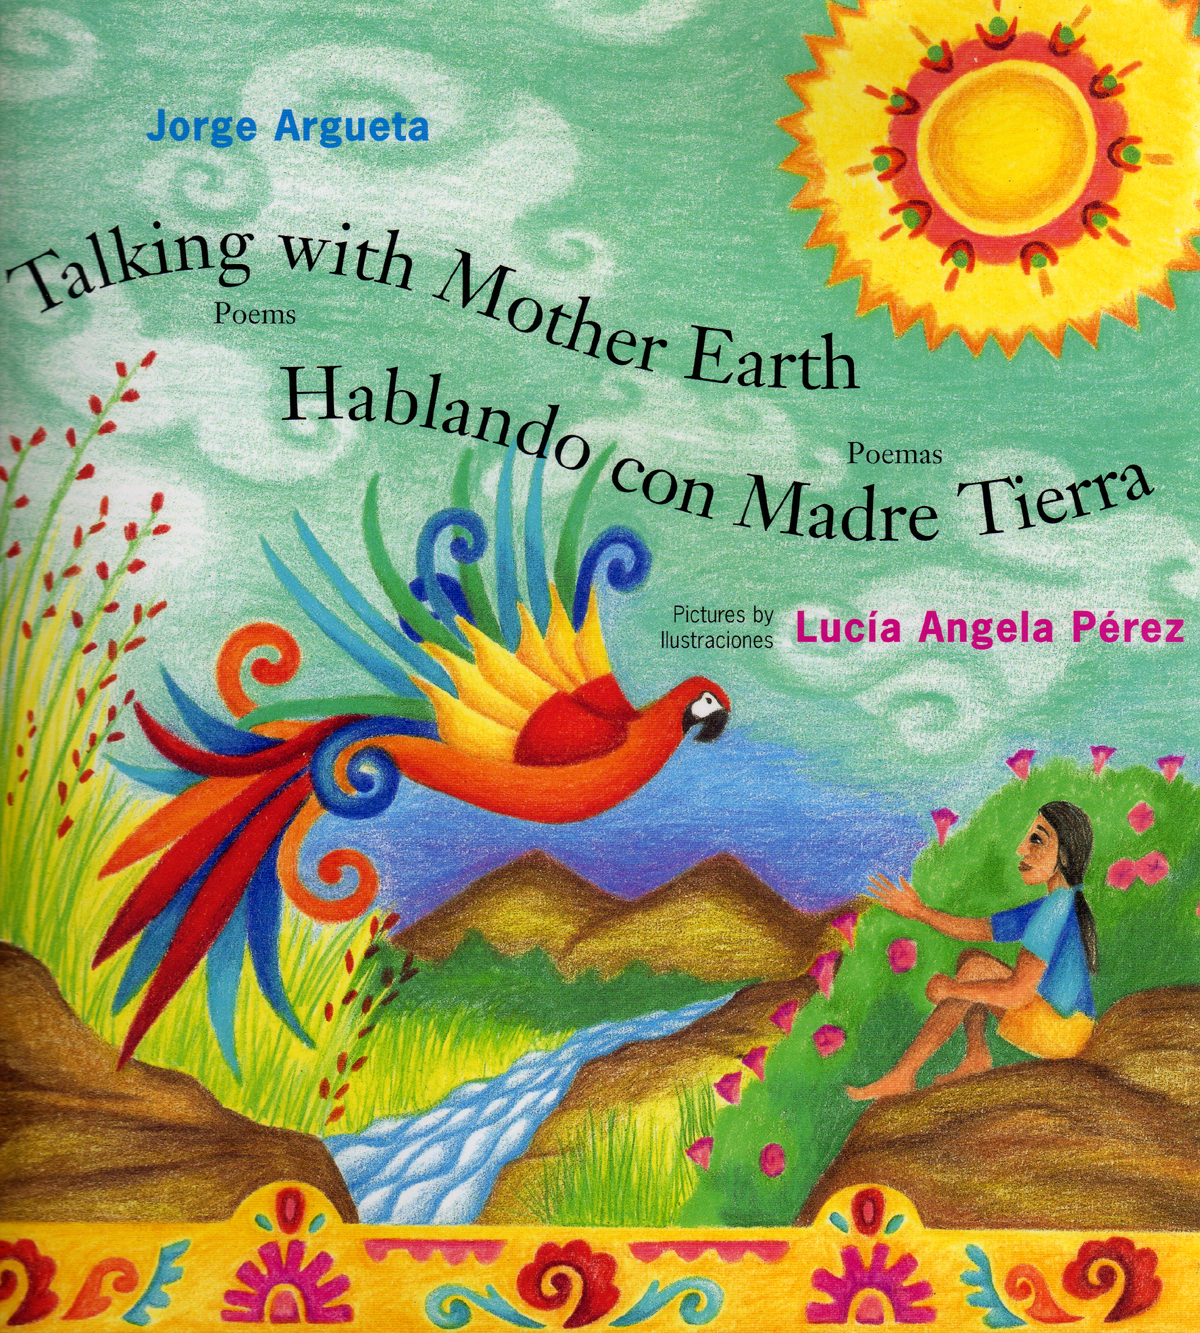 Cover of "Talking with Mother Earth/Hablando con Madre Tierra." Features a child sitting on a hill looking at a large parrot.